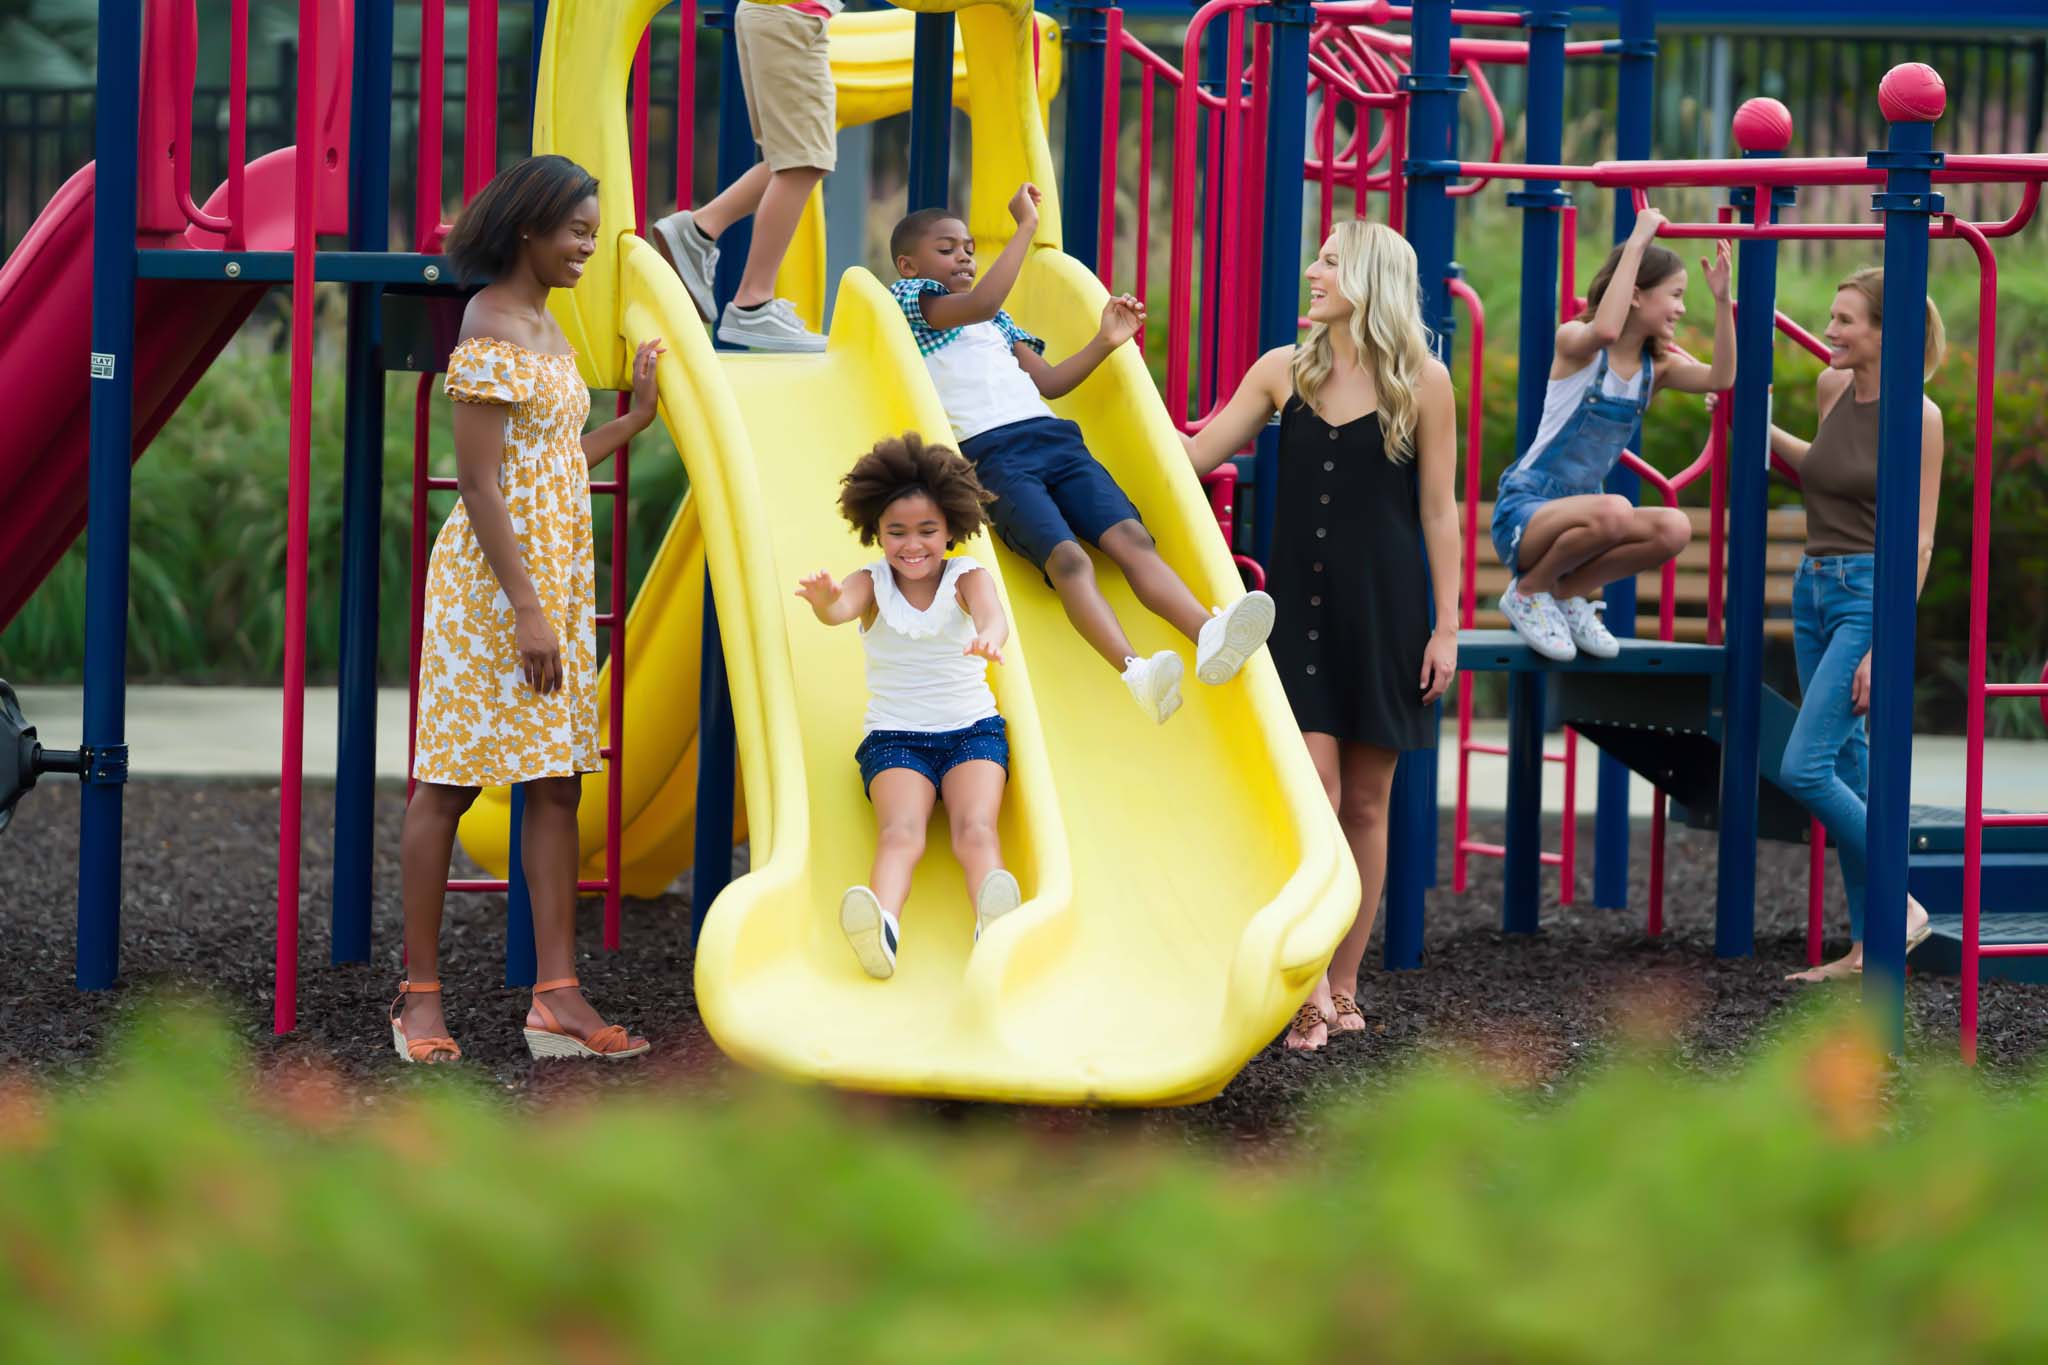 Kids sliding down slides while playing with their moms at Golden Bear Park.